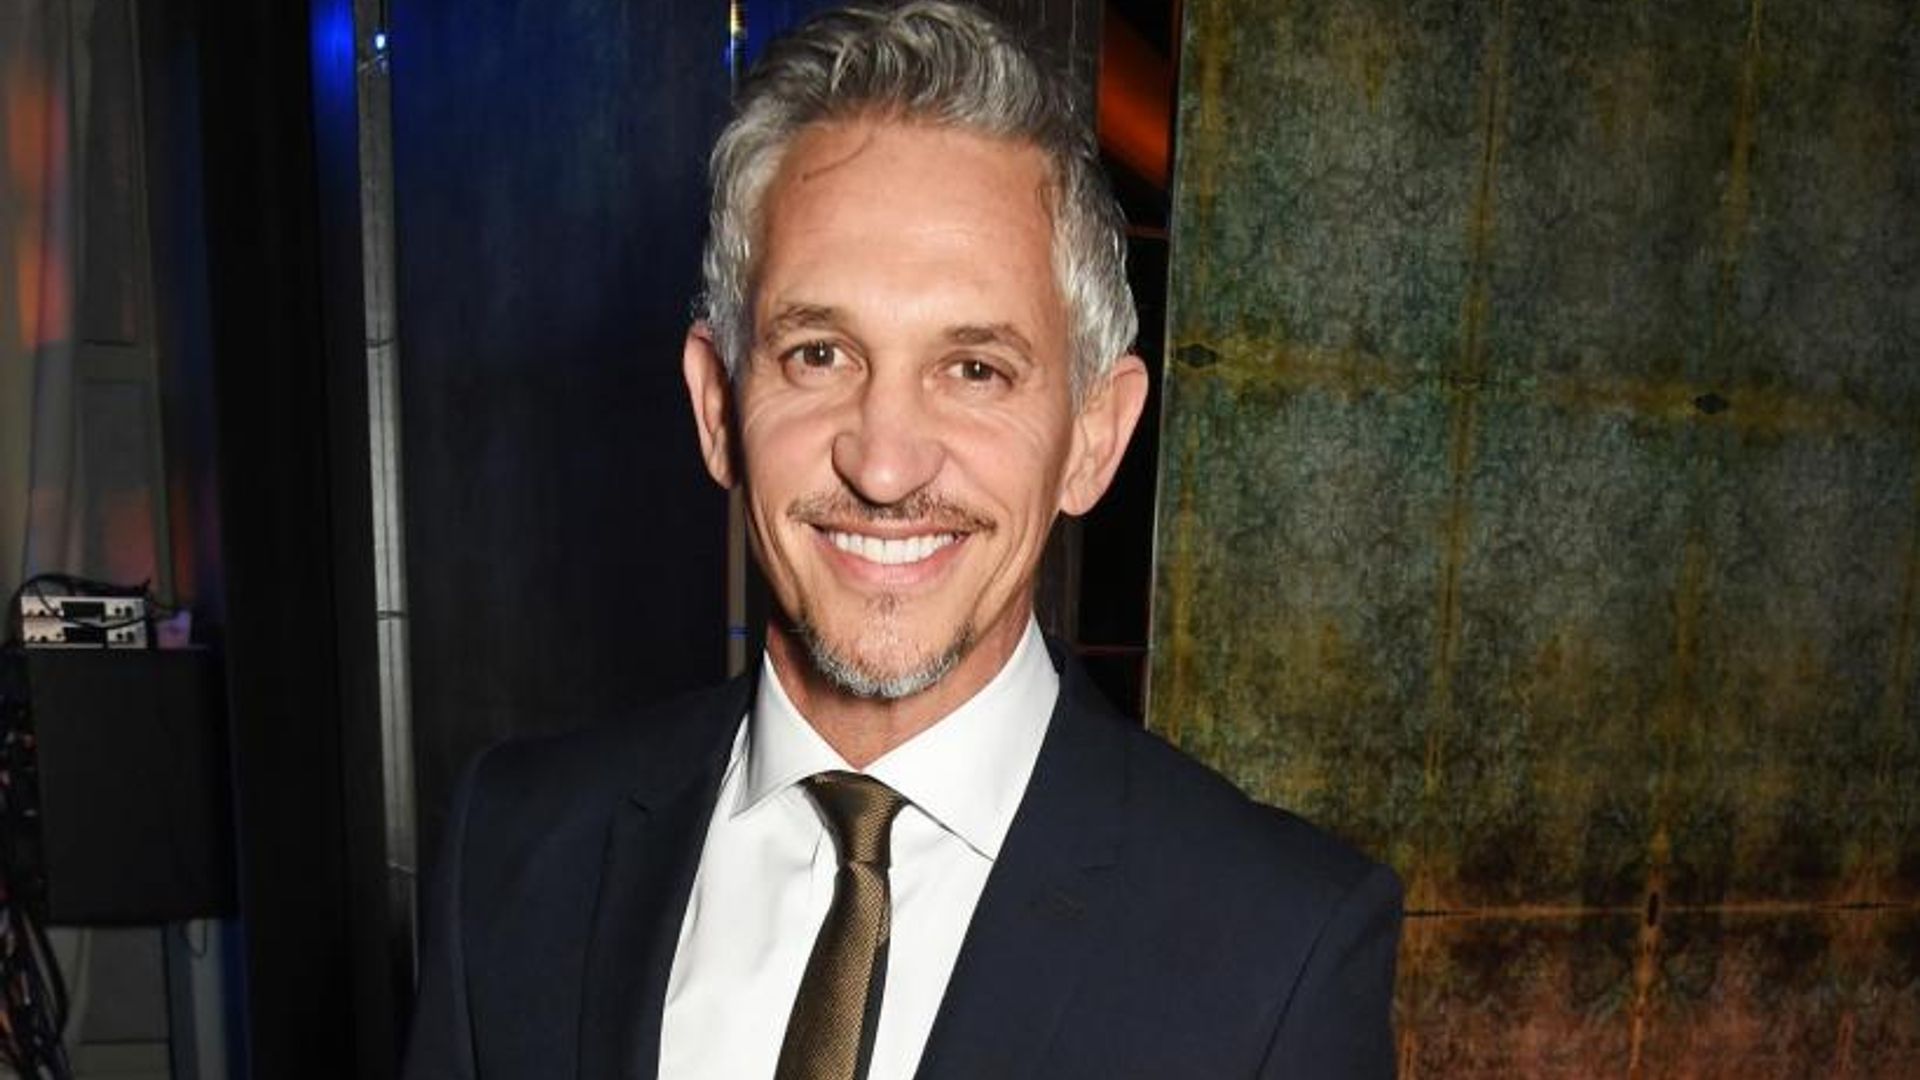 Gary Lineker pays emotional tribute to 'wonderful father' following his death